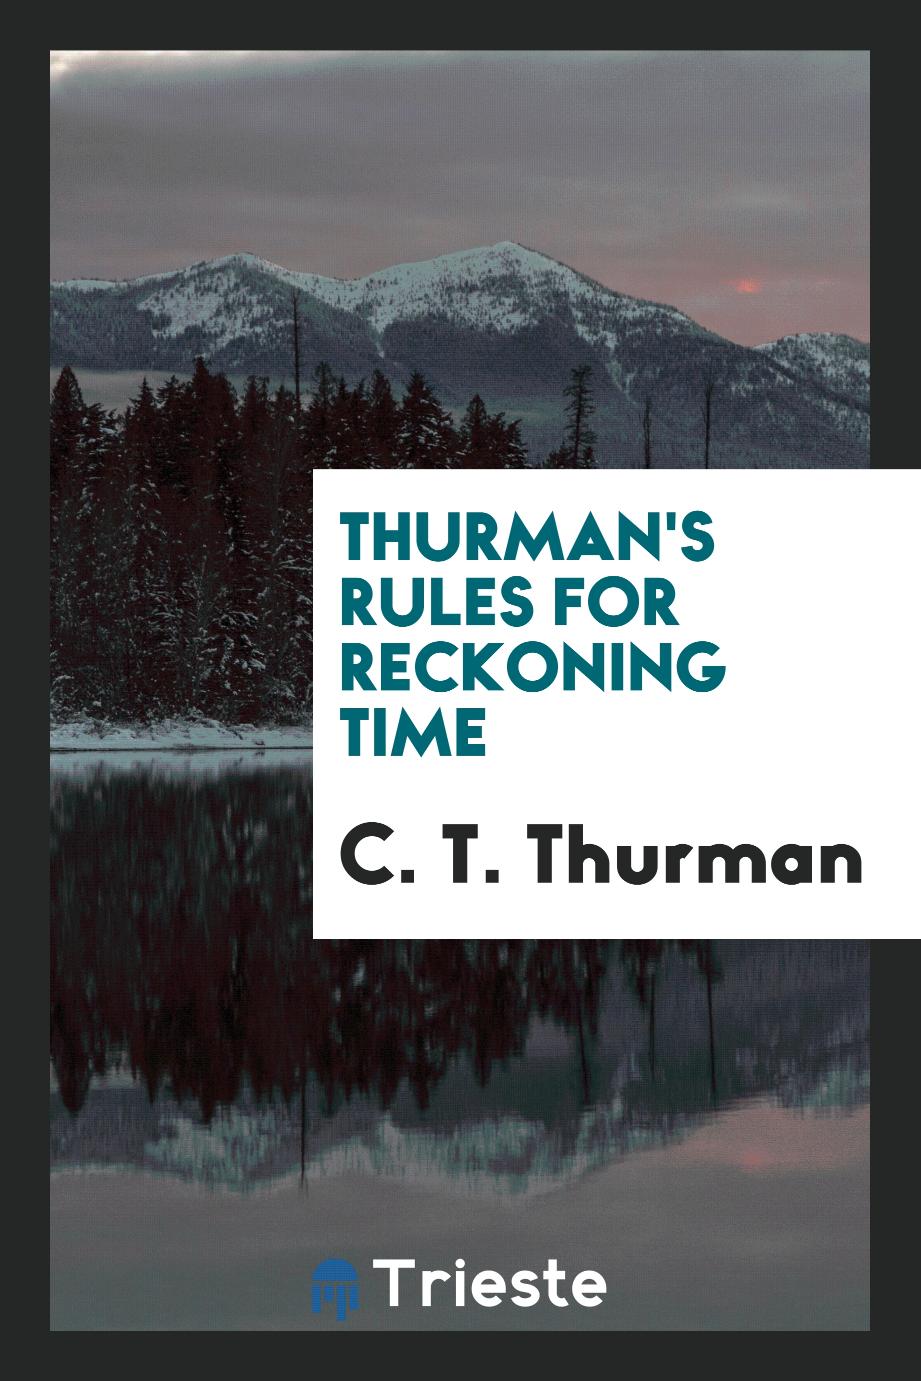 Thurman's Rules for Reckoning Time